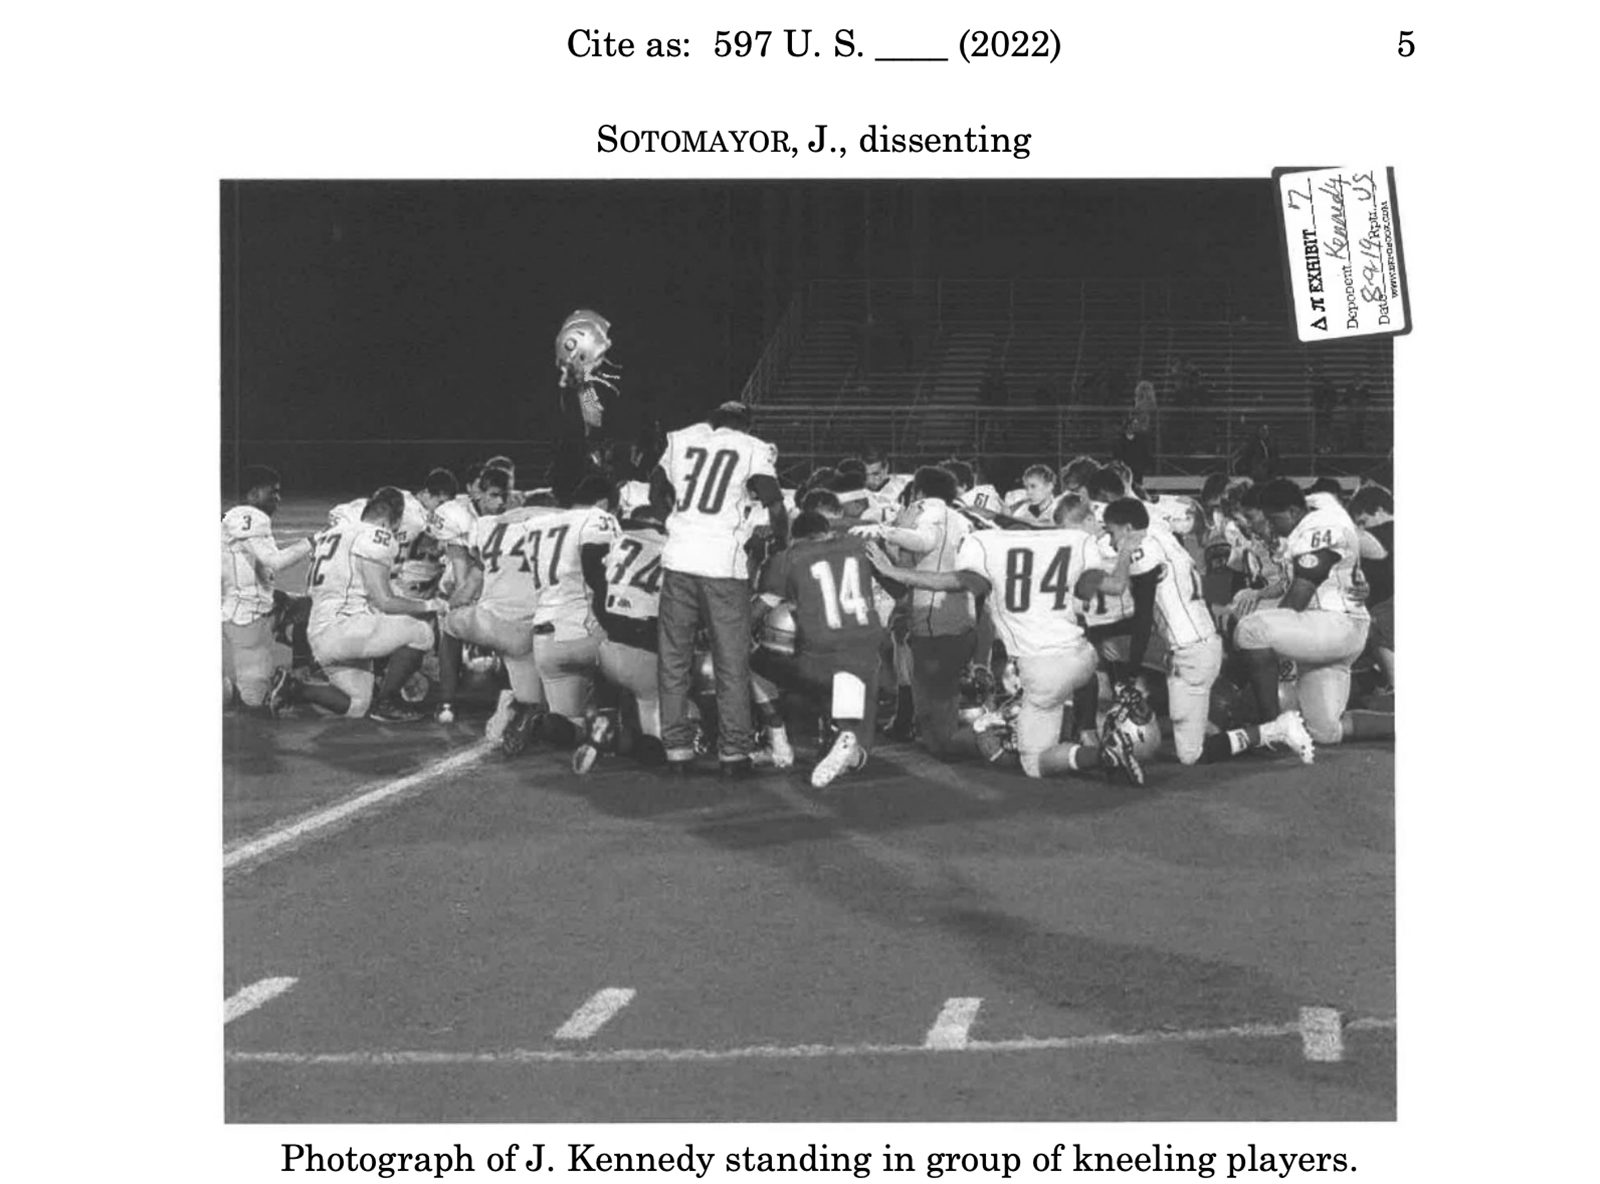 A photo of Joe Kennedy standing in a group of praying players was used as an exhibit in Supreme Court Justice Sonia Sotamayor's dissenting opinion.  Screenshot